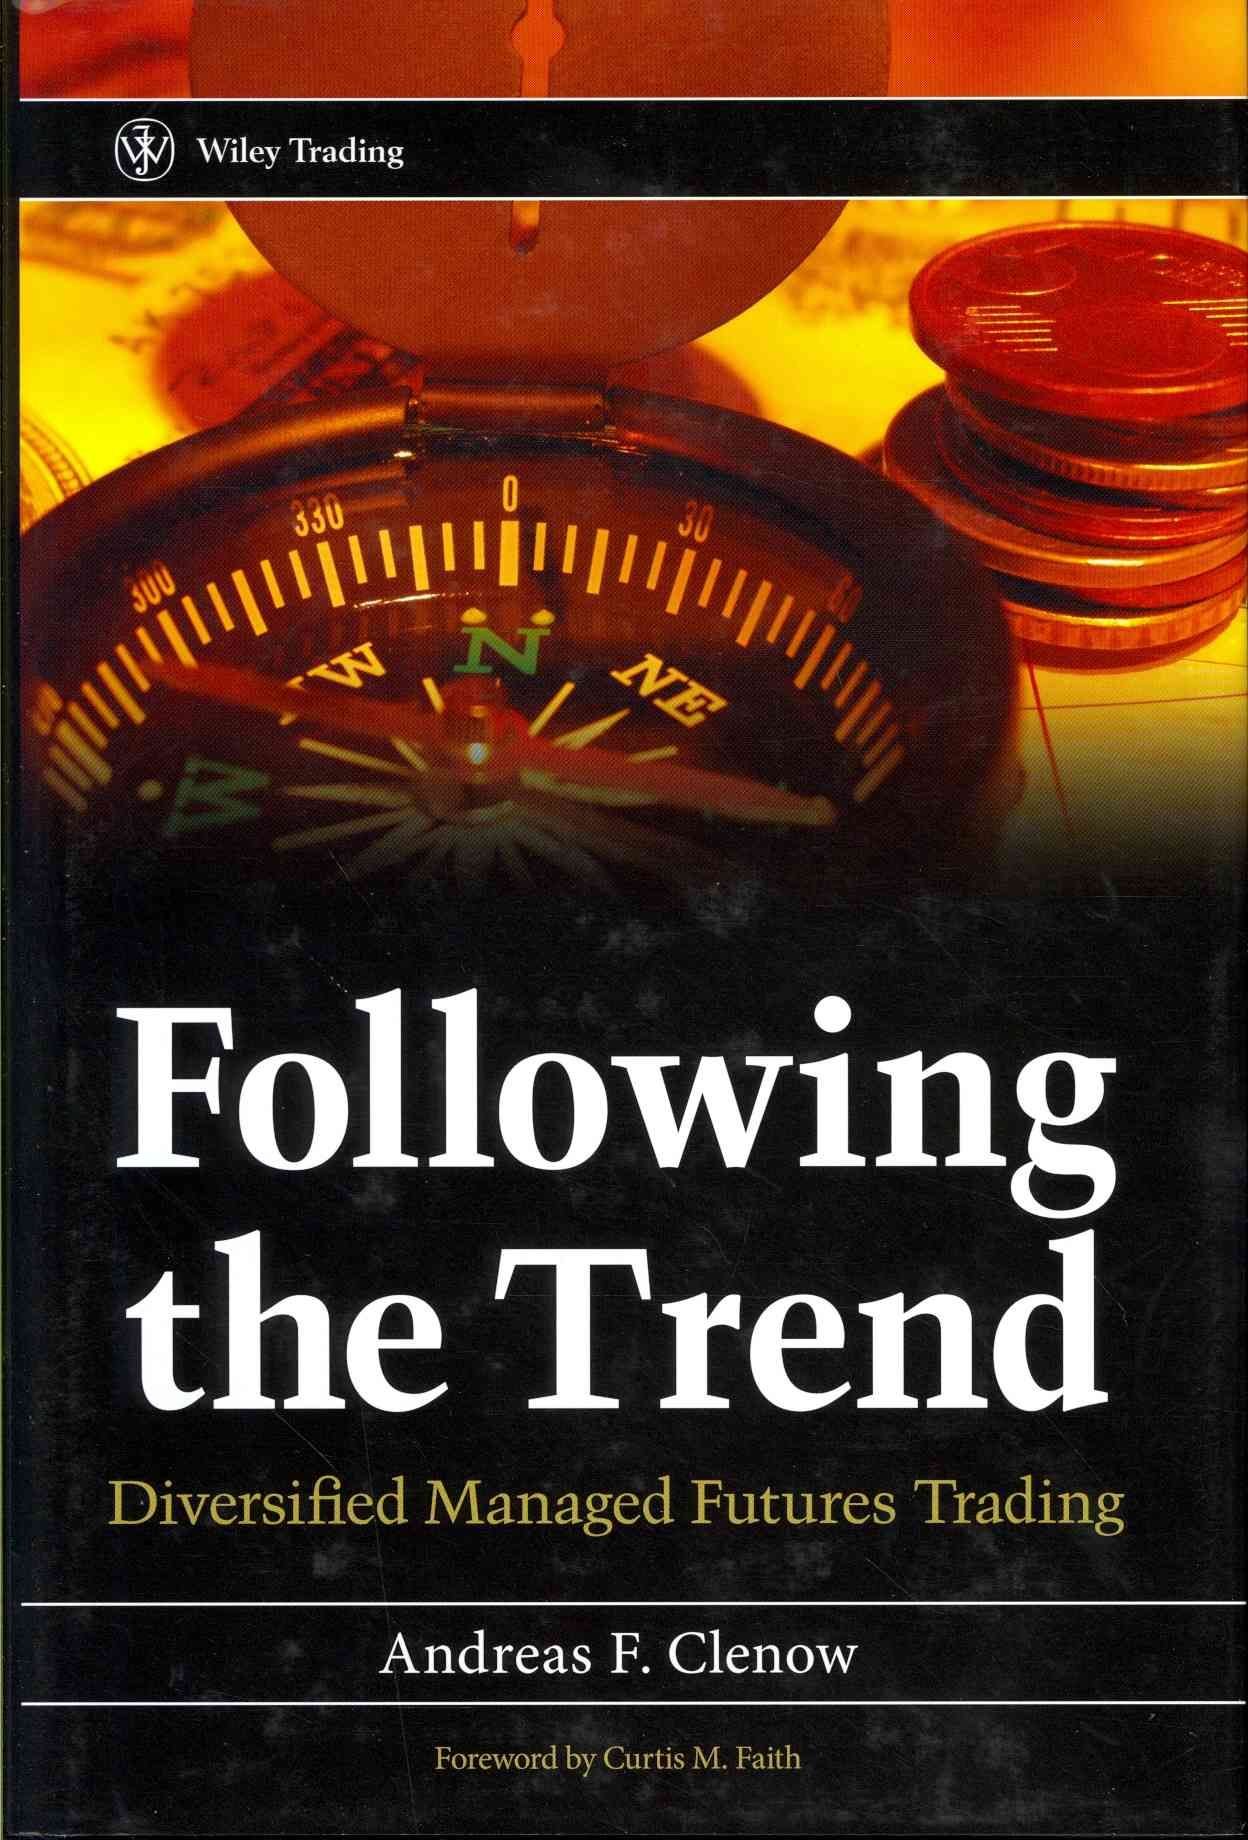 Following the Trend - Diversified Managed Futures Trading